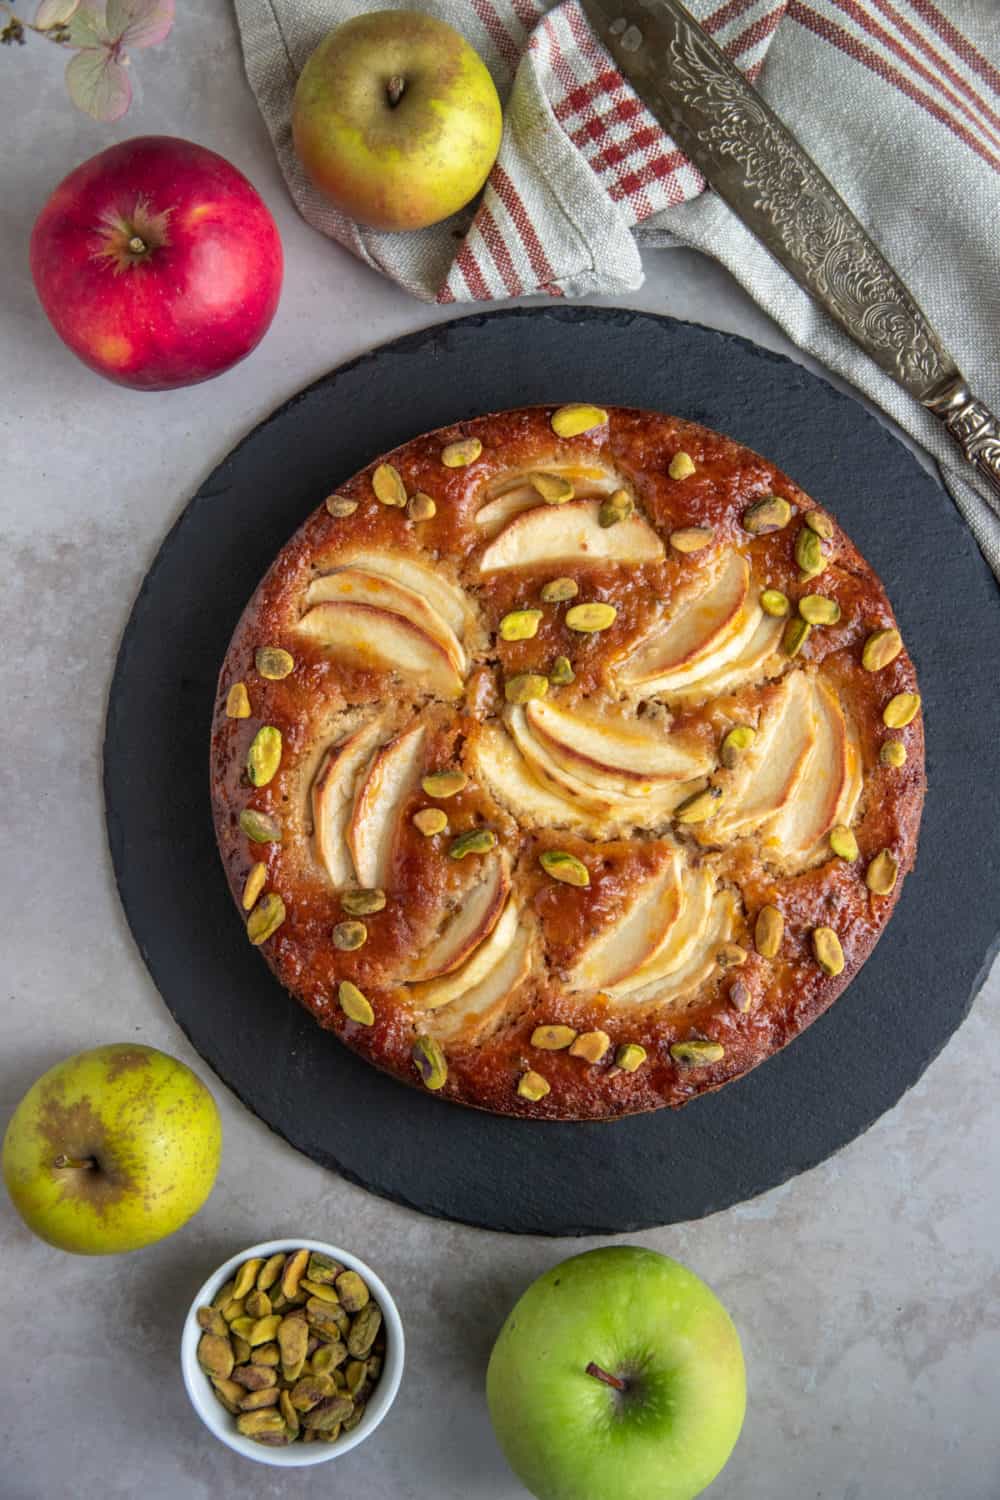 Apples Cake with PIstachios from Bakes by Brown Sugar